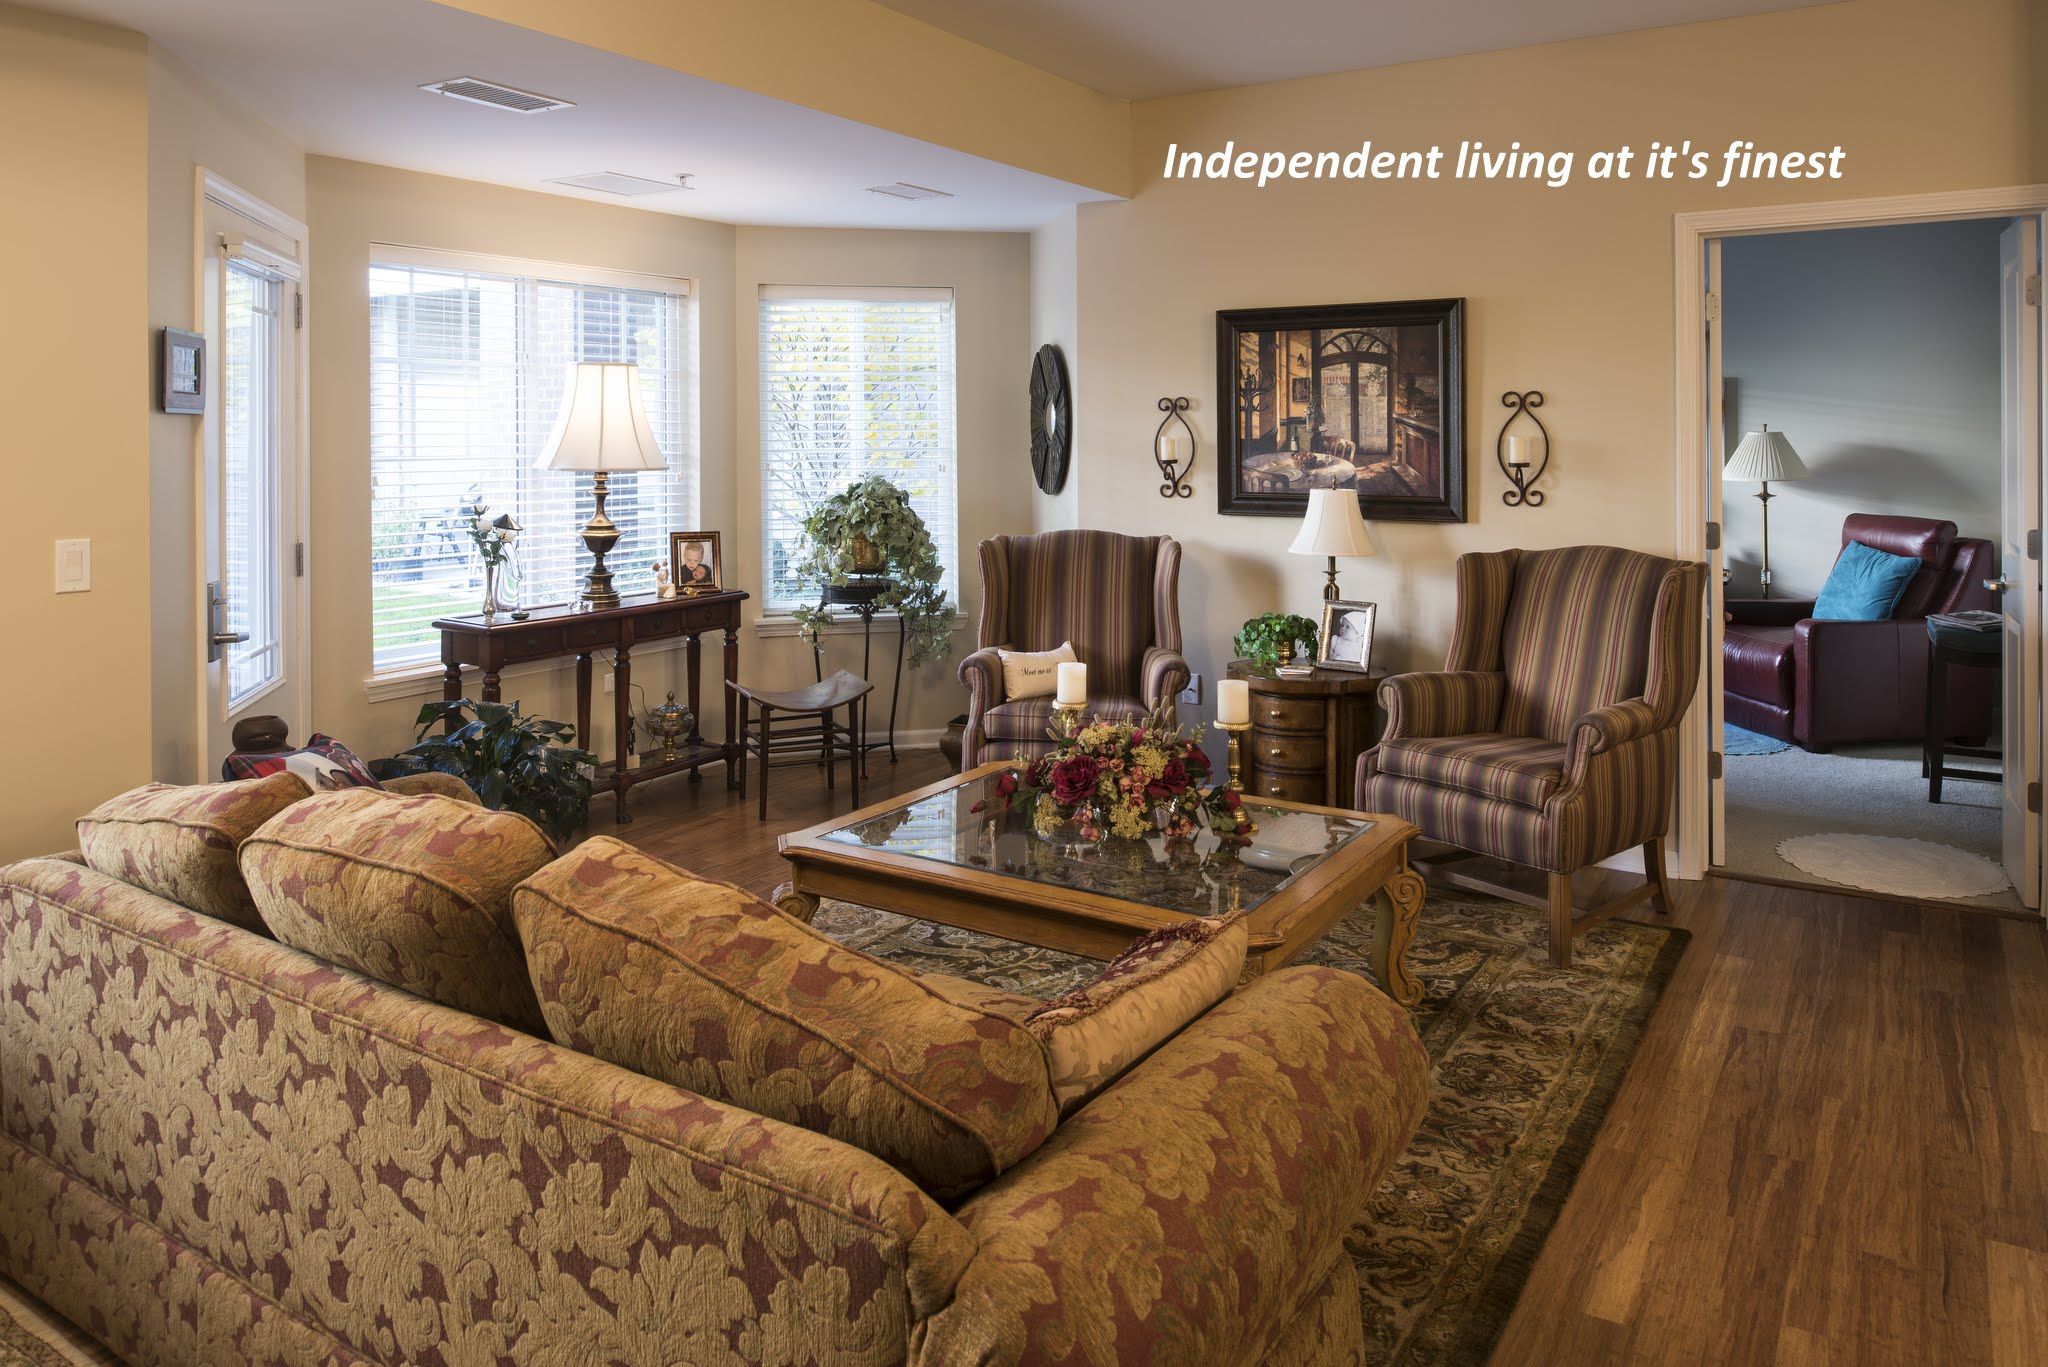 Senior living room interior at The Lodge of Northbrook featuring hardwood flooring and cozy decor.